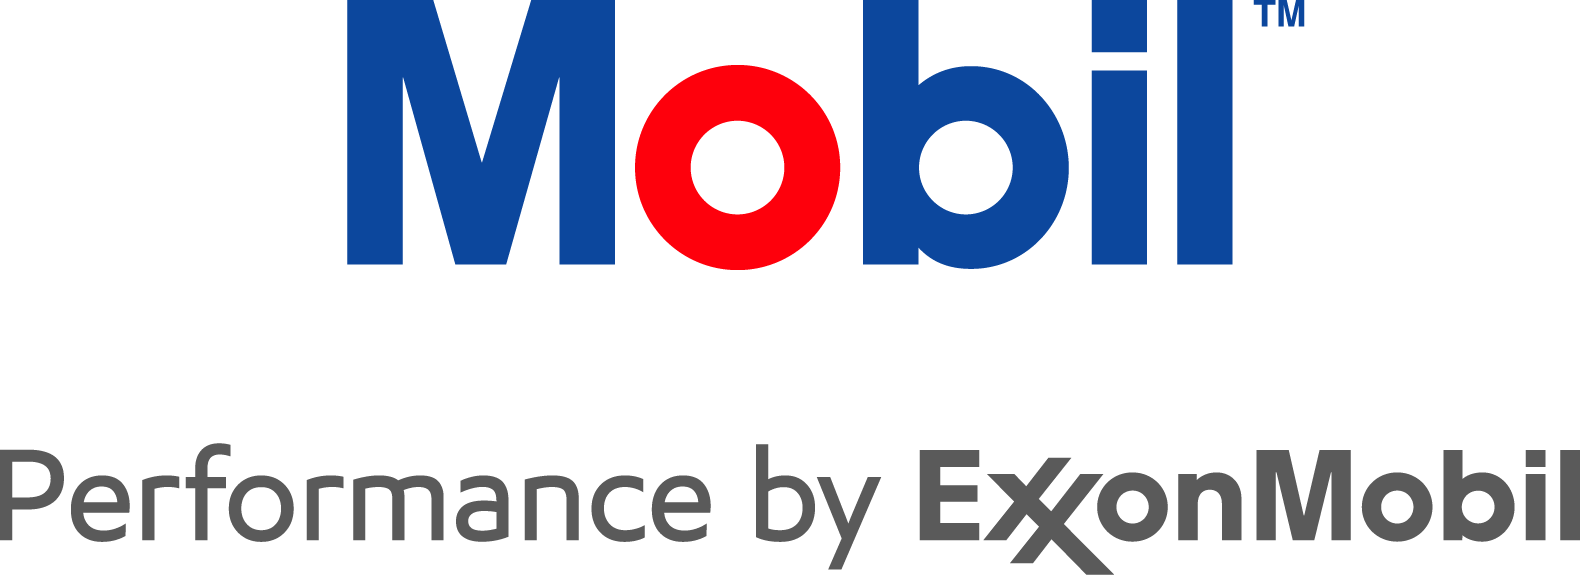 Mission Statement - Mobil Performance By Exxonmobil (1580x575), Png Download